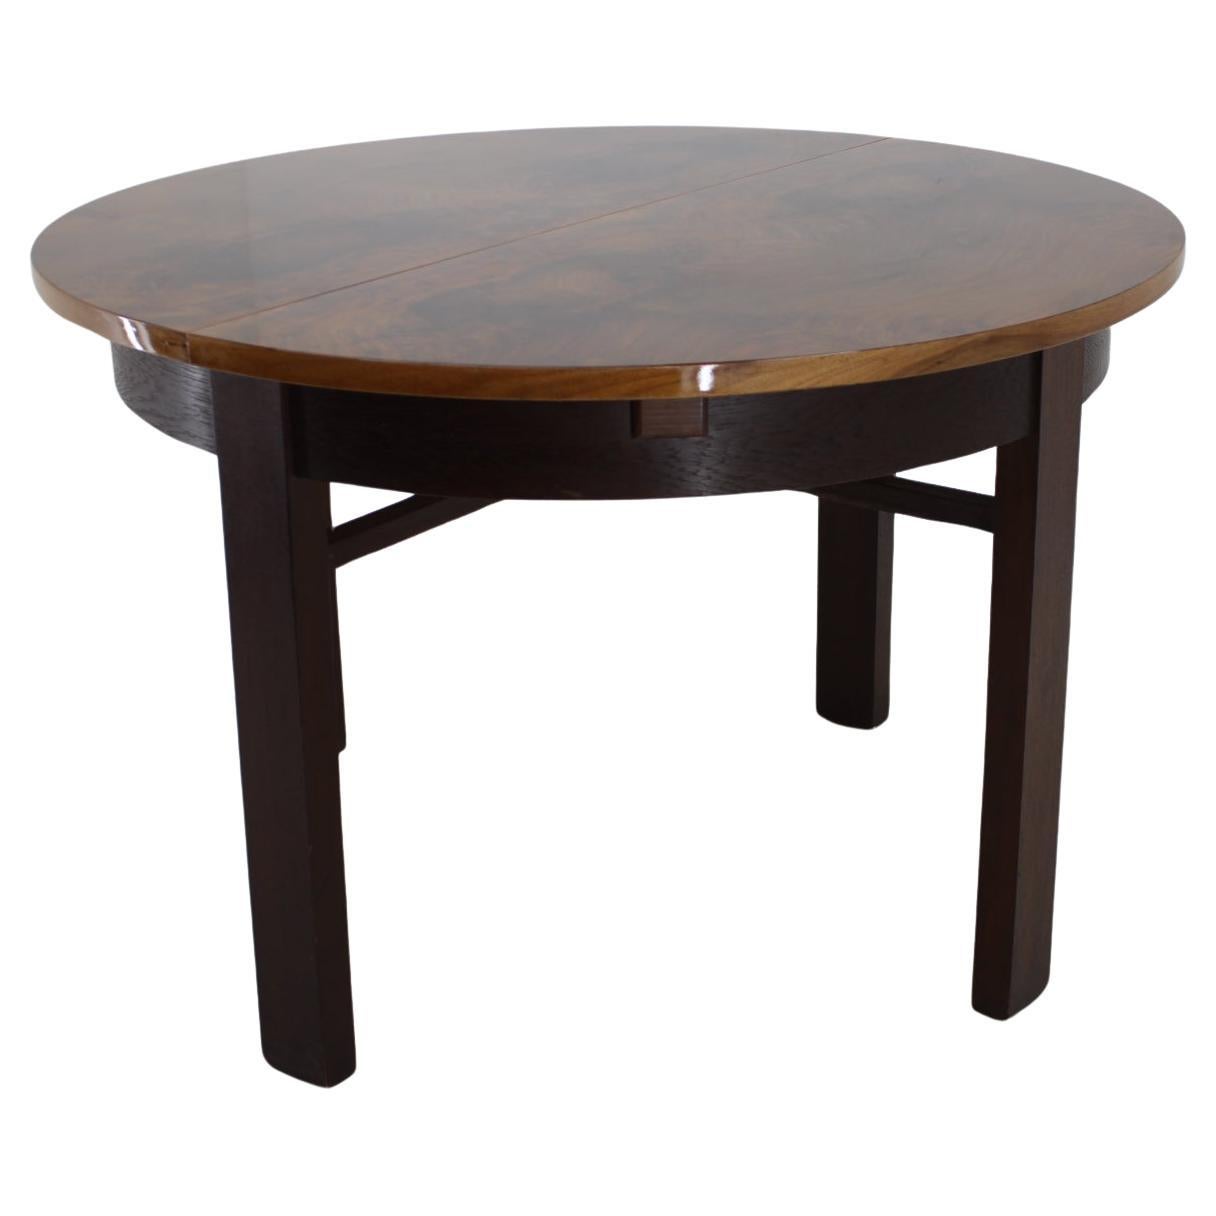 1930s Round /Oval Art Deco Extendable Dining Table in Walnut, Restored  For Sale